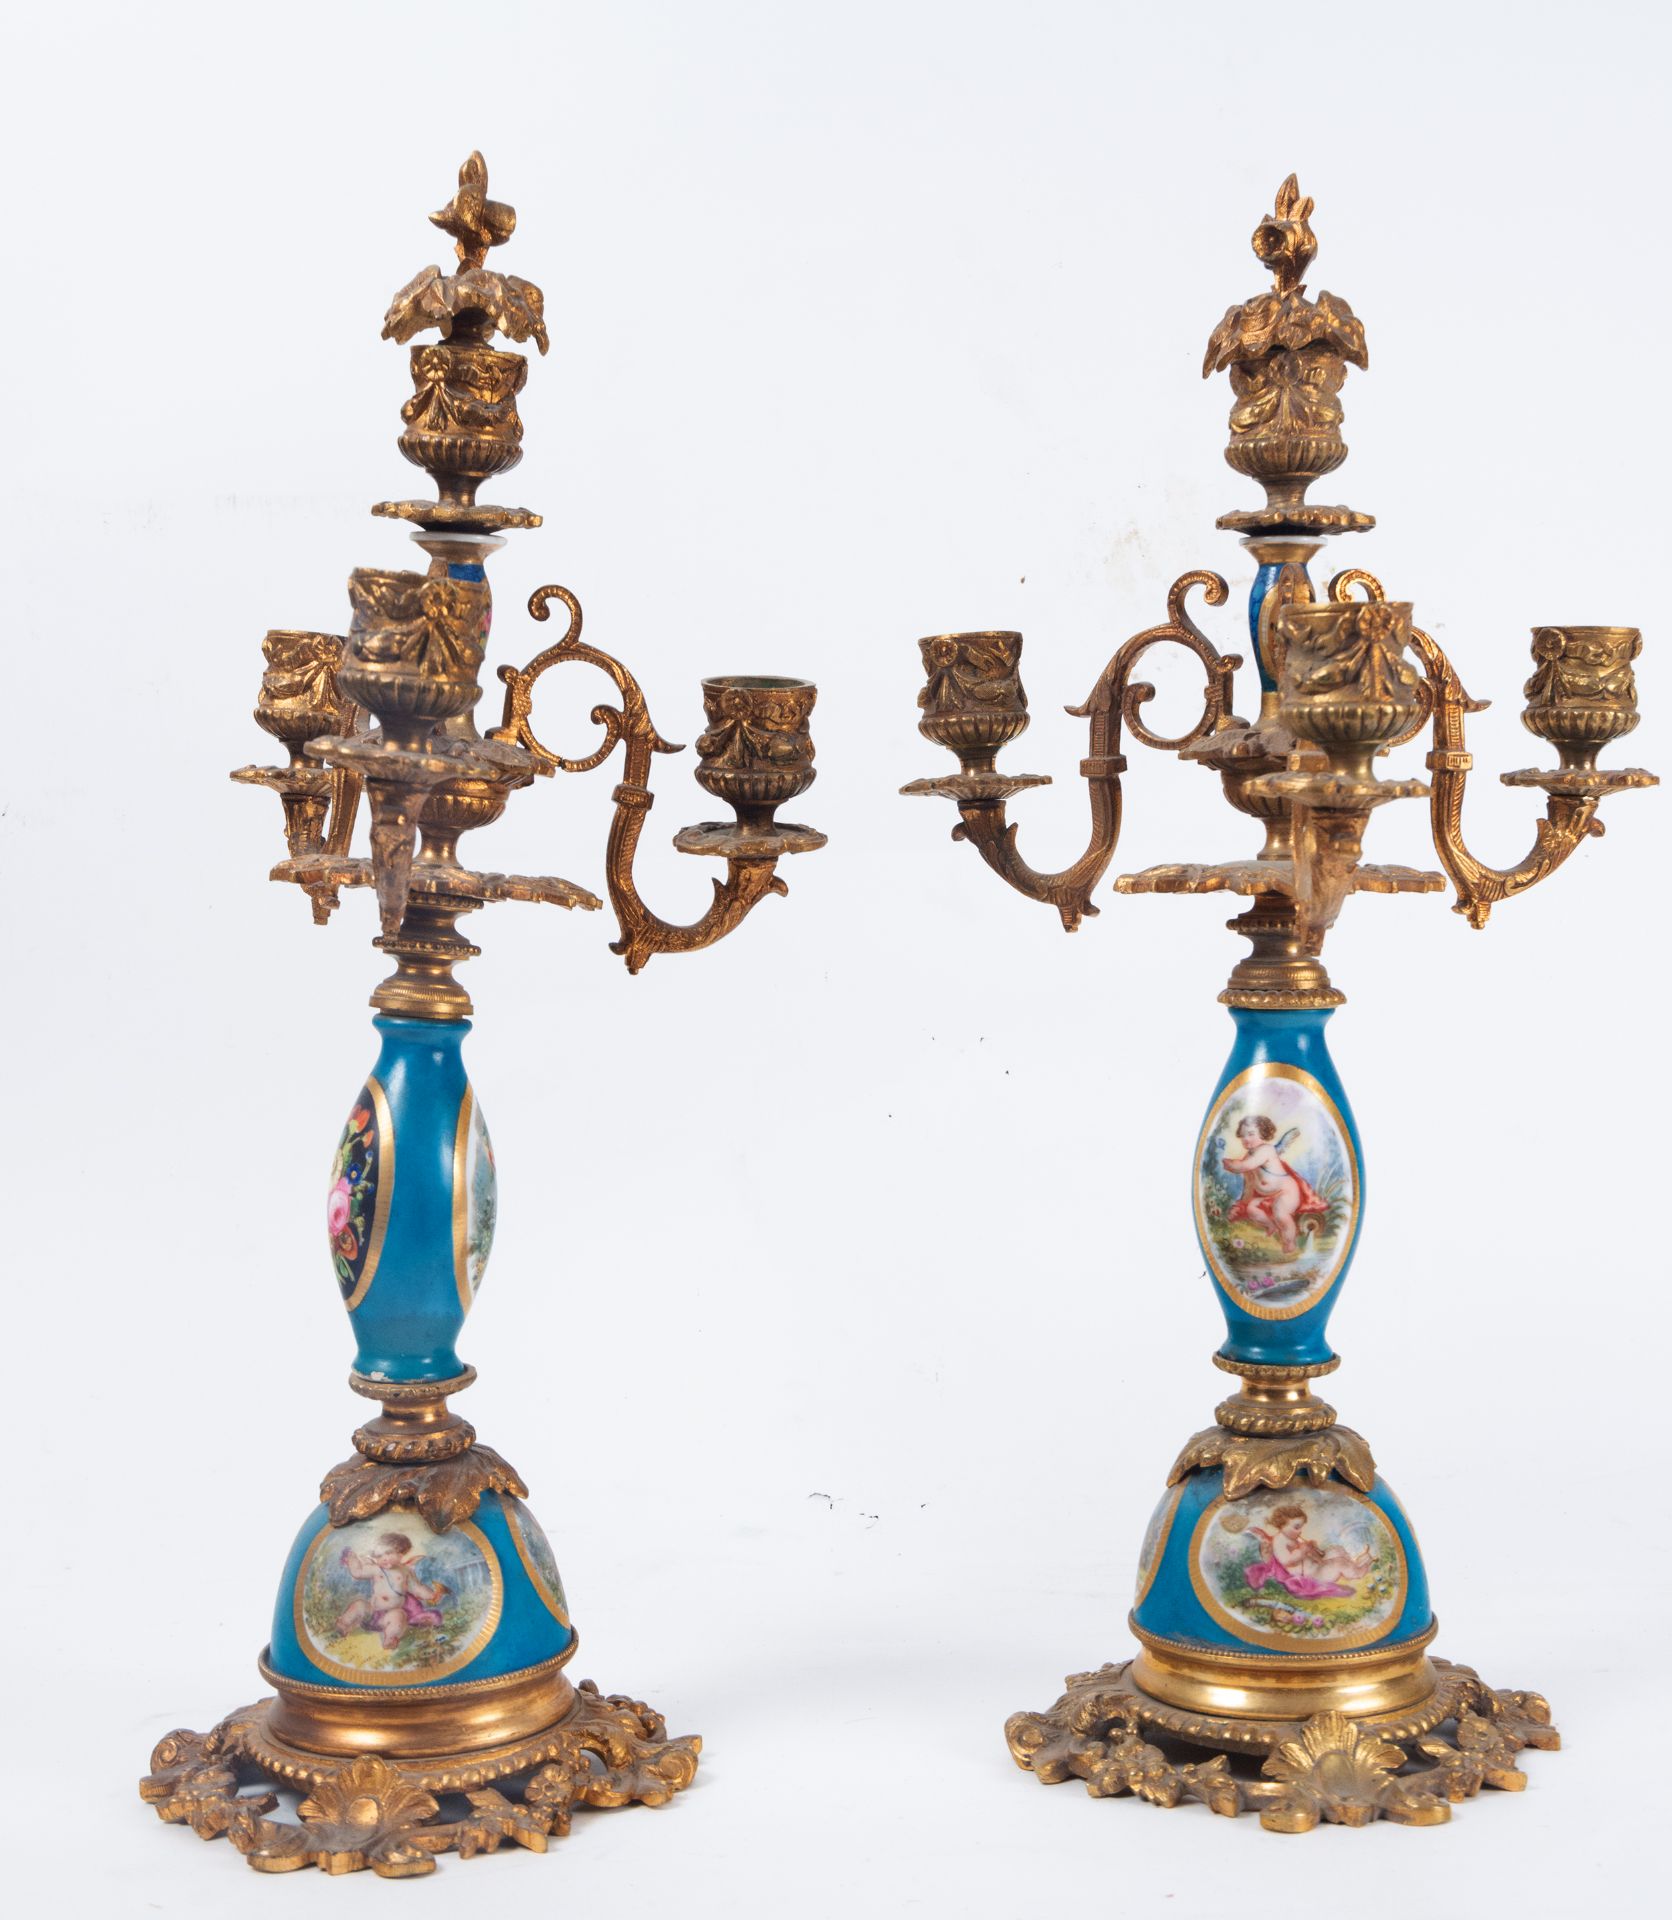 Pair of Candlesticks in Bronze and Old Paris porcelain, French school of the 19th century